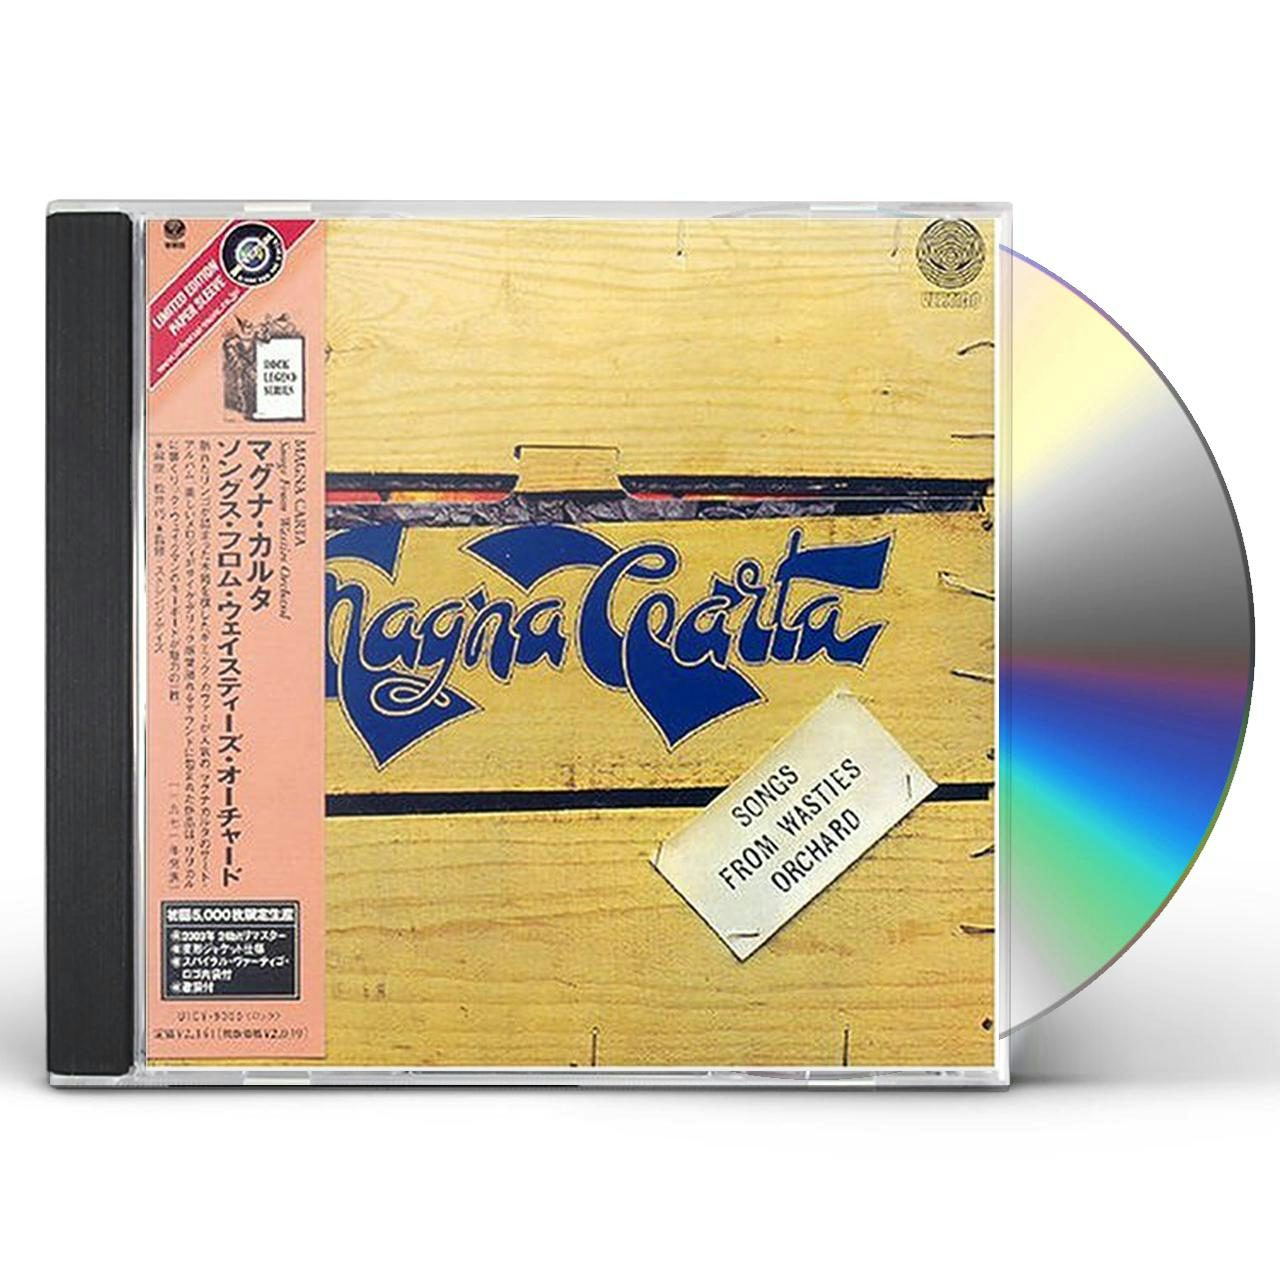 songs from wasties orchard cd - Magna Carta